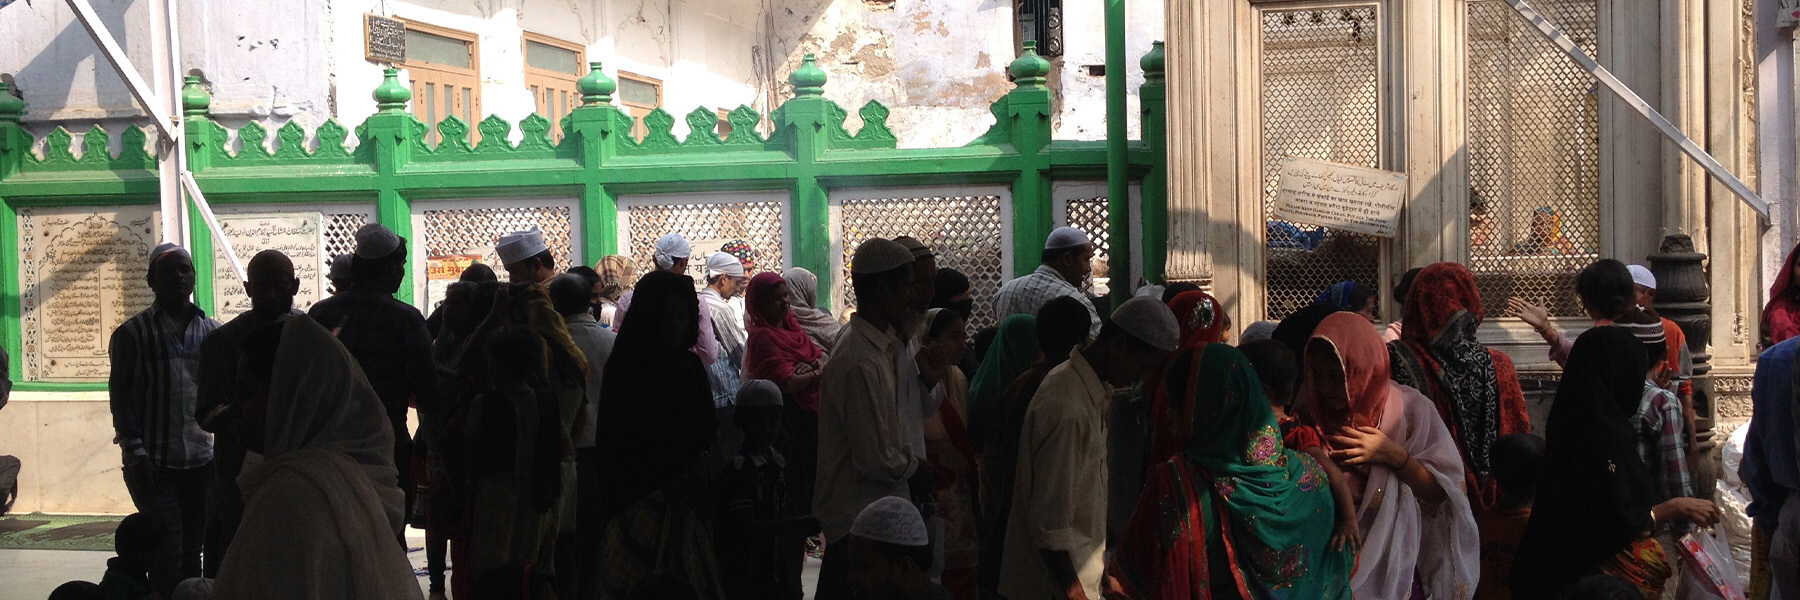 People standing in front of the Nizamuddin Dargah in Delhi, India